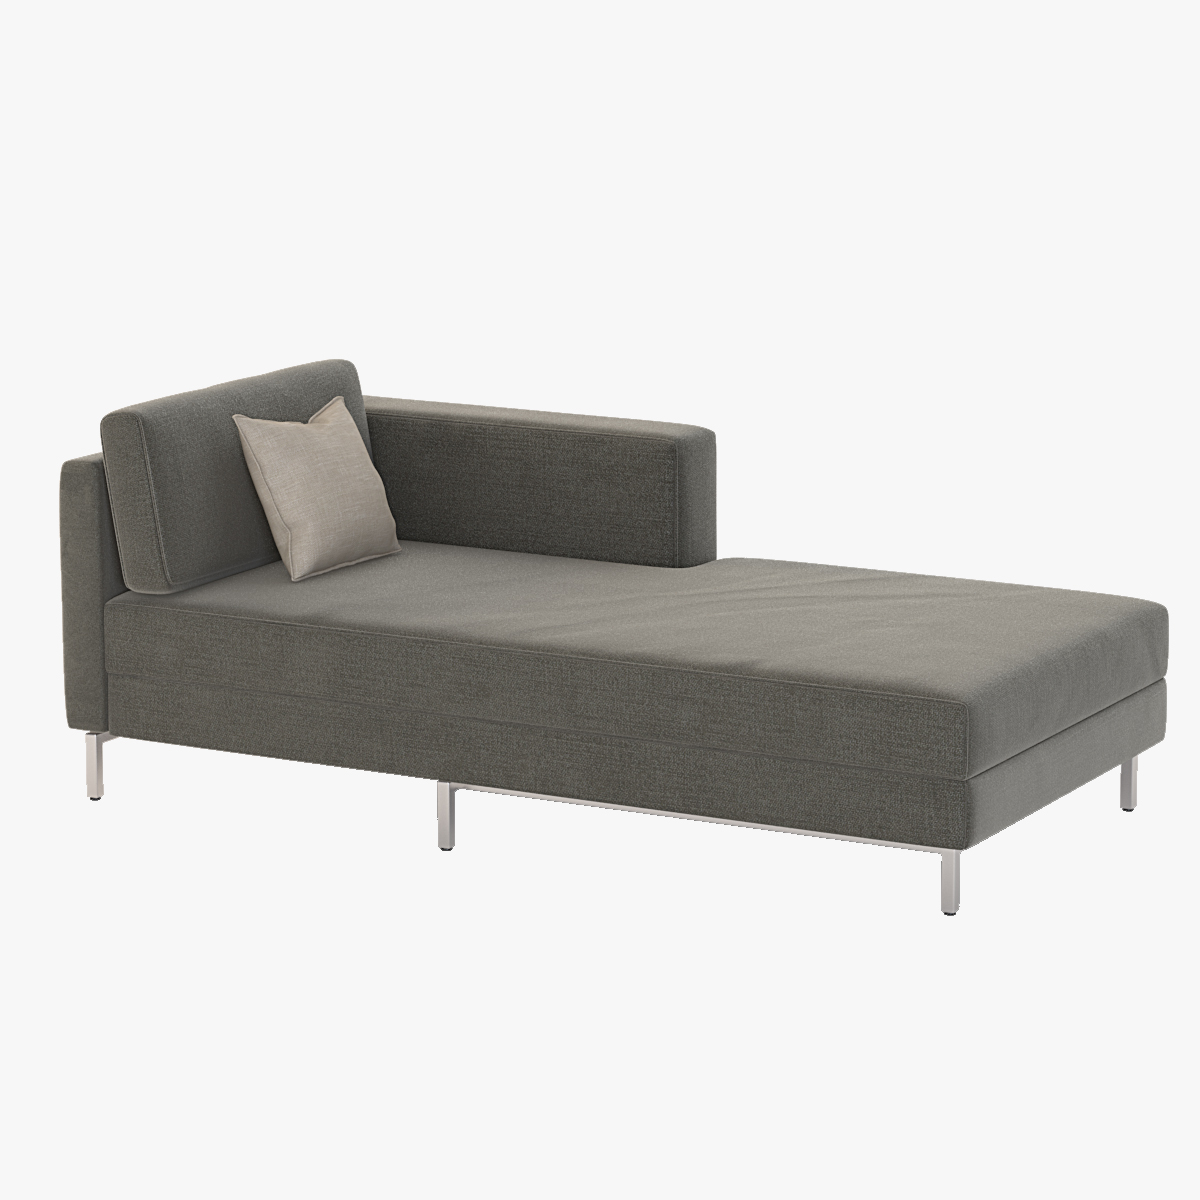 Davenport Bi Sectional Chaise Daybed 3D Model_01